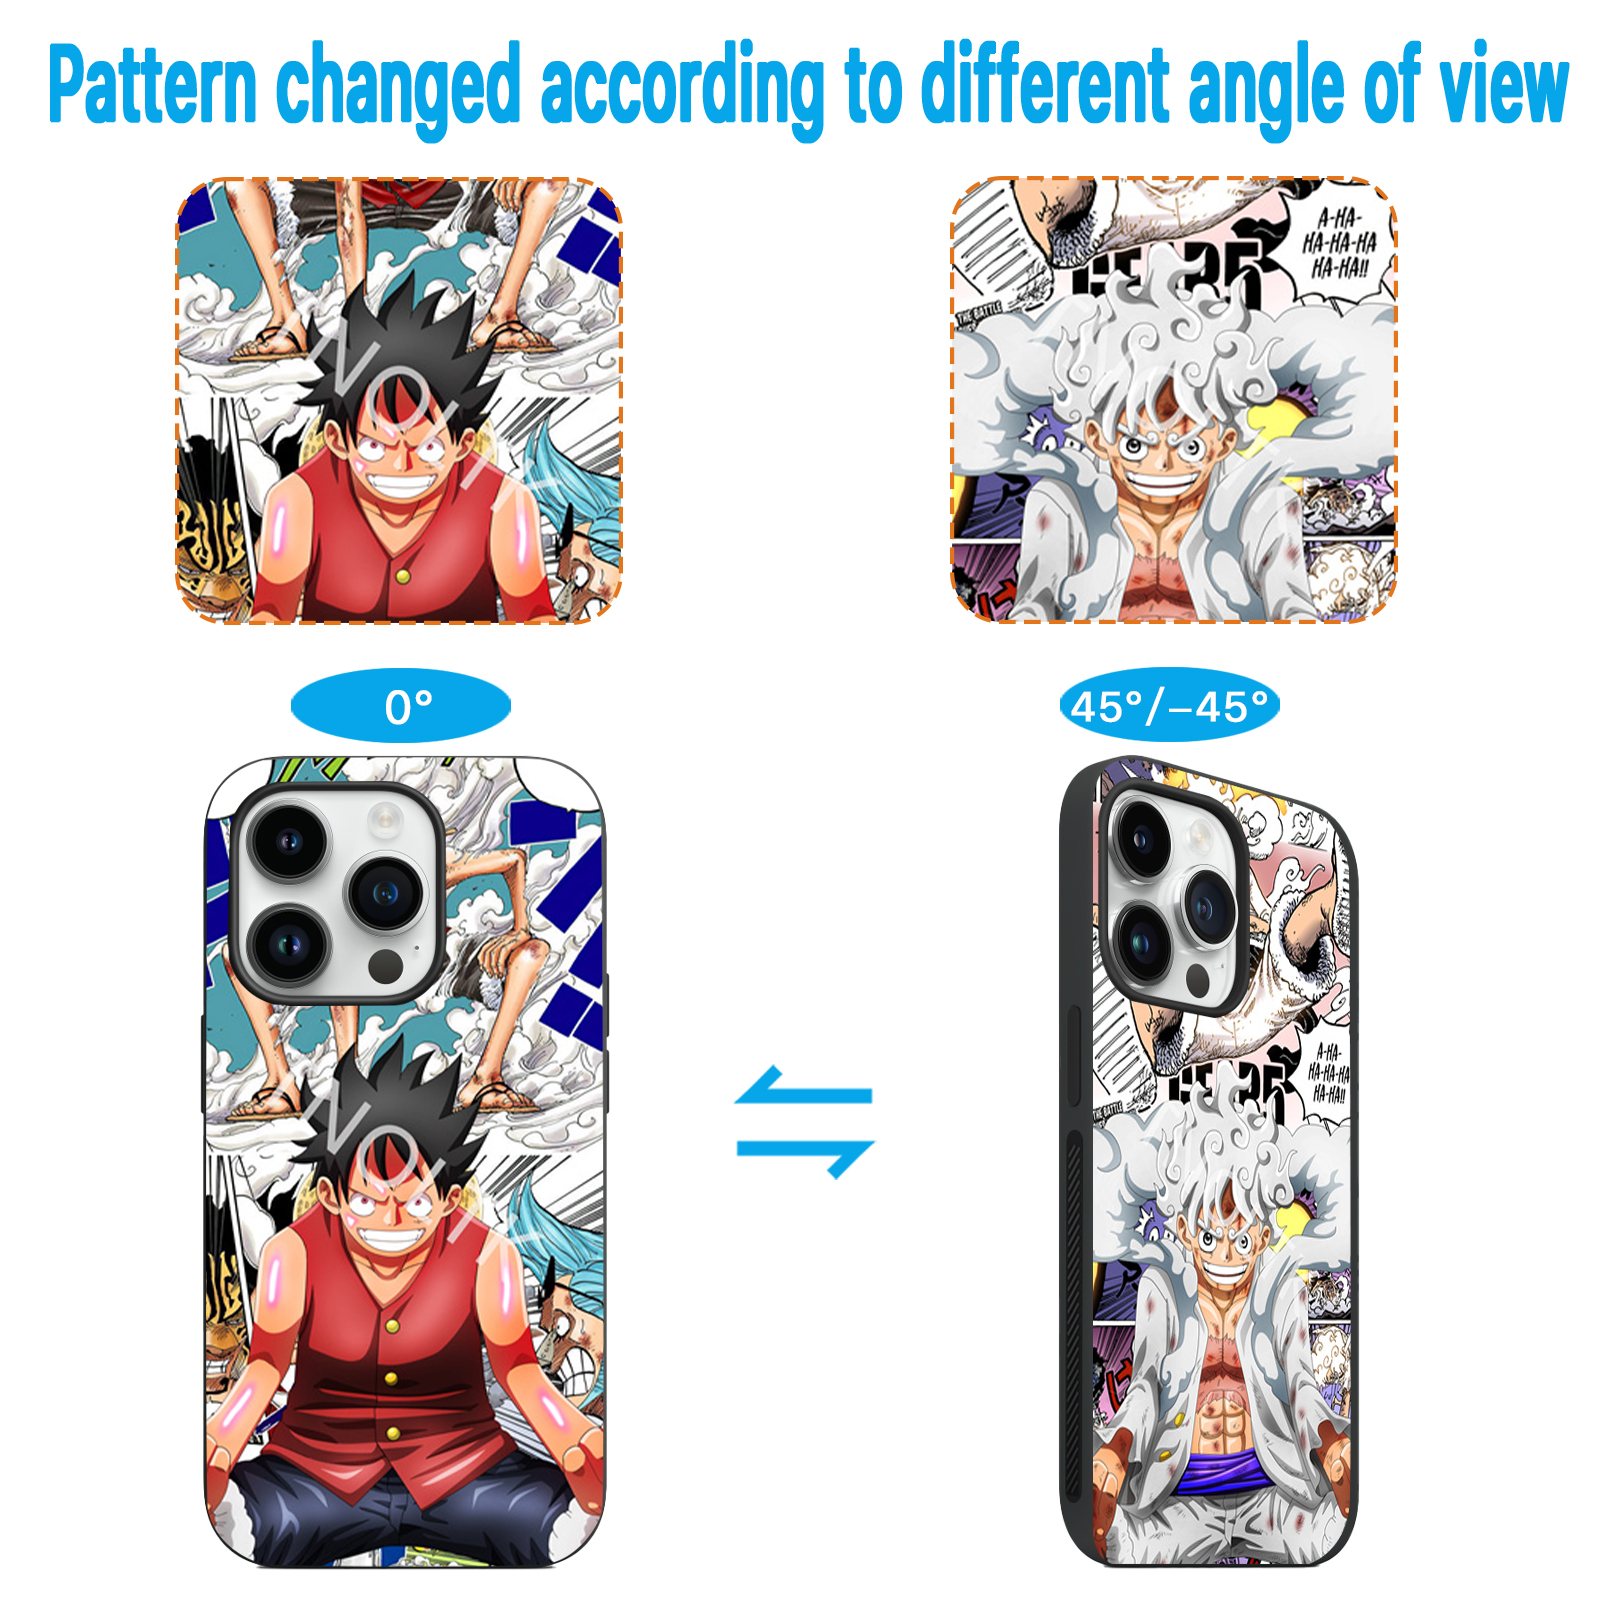 3D Motion iPhone One Piece Anime Phone Cases